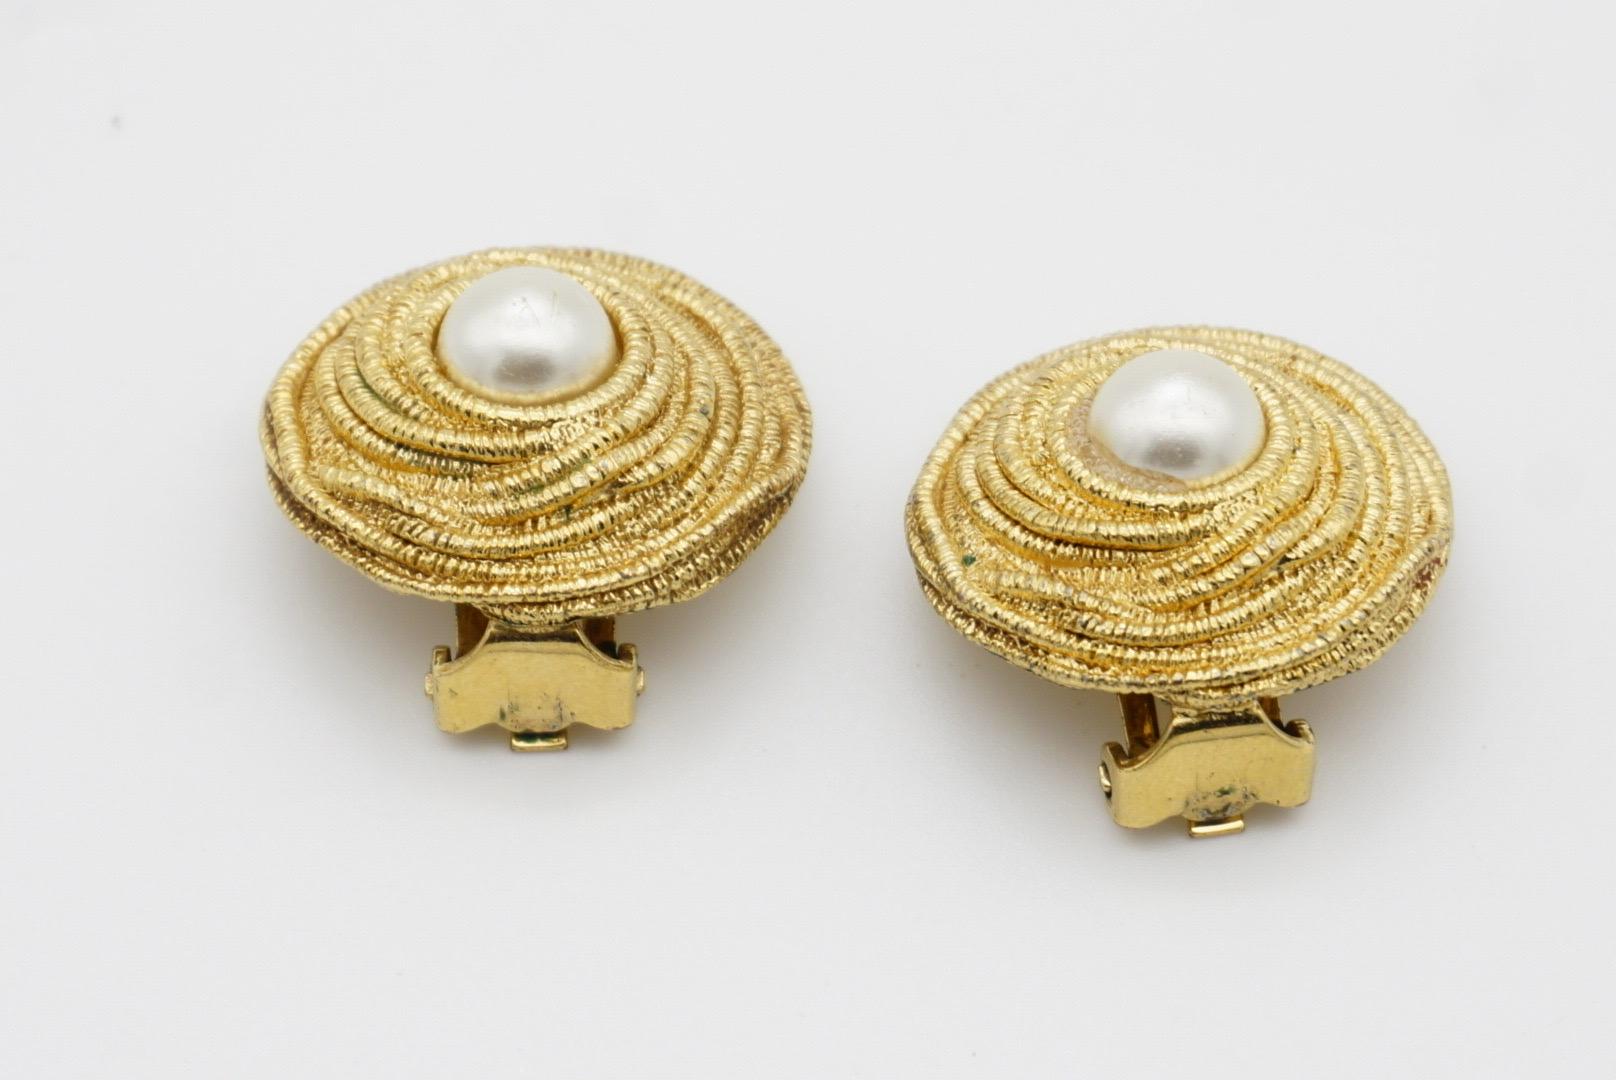 Christian Dior Vintage 1980s Irregular Spiral Round Circle Pearl Clip Earrings For Sale 9